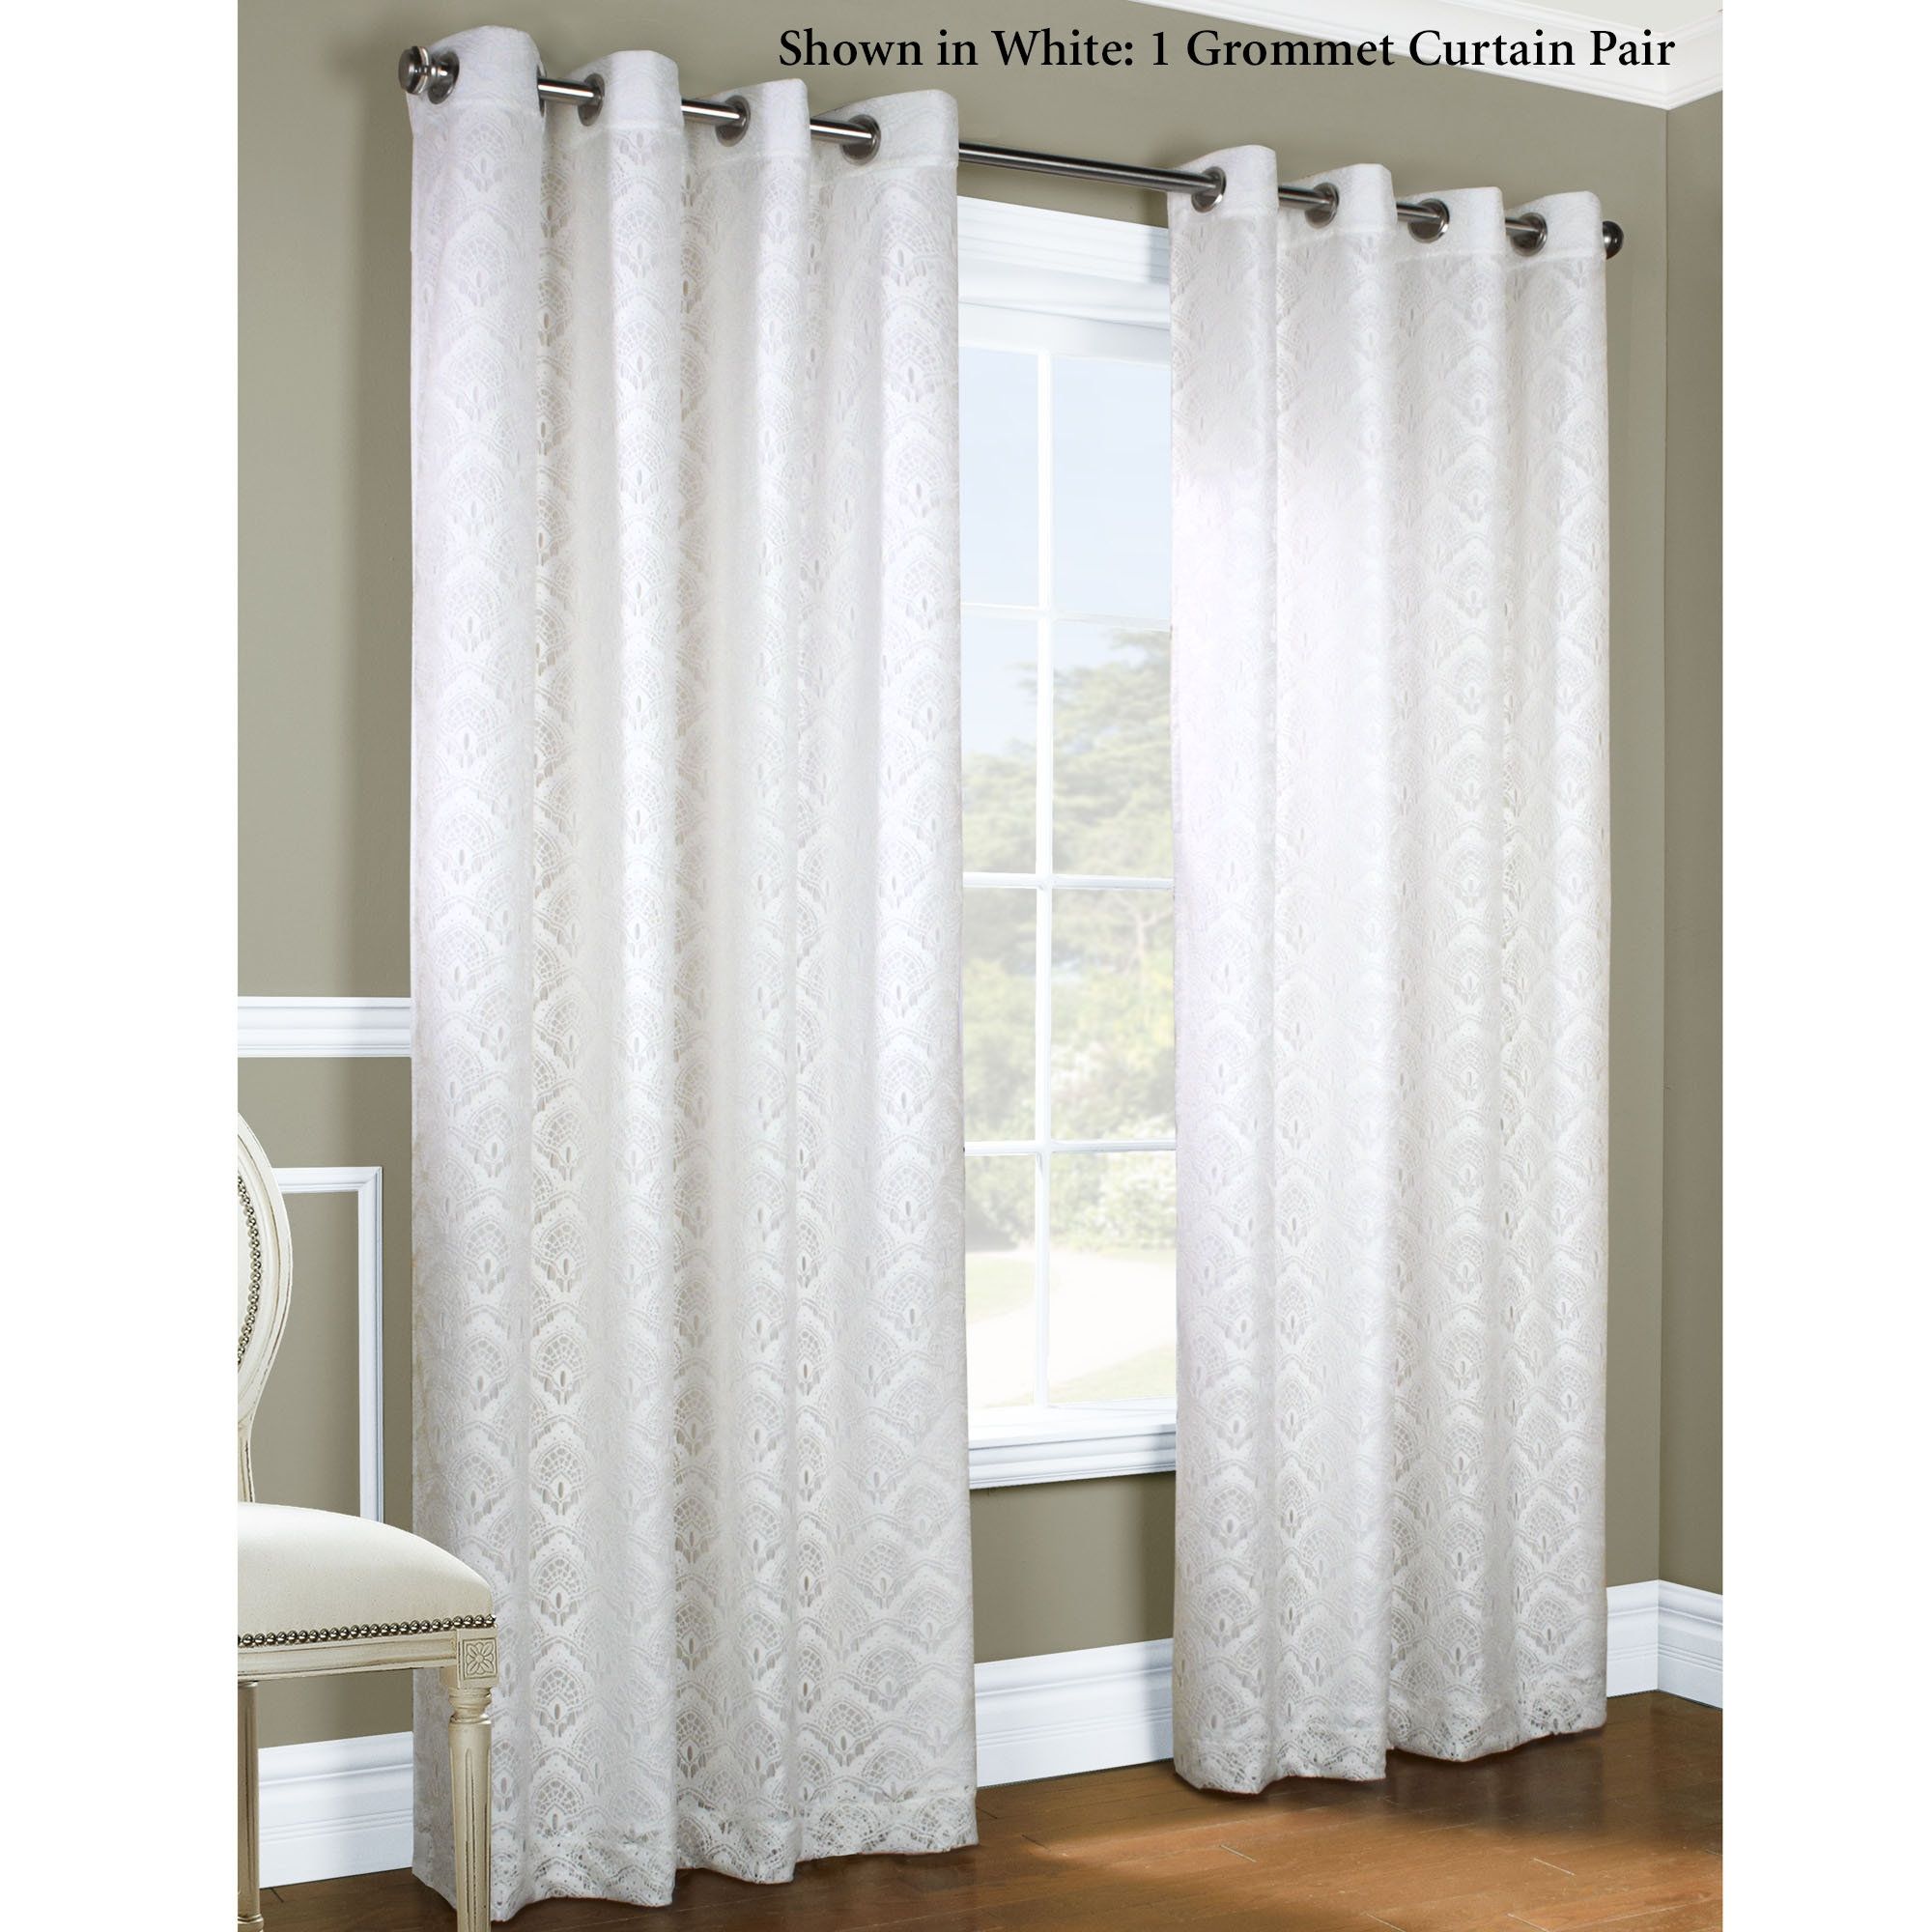 Long White Blackout Curtains Best Curtains 2017 With White Opaque Curtains (View 3 of 15)